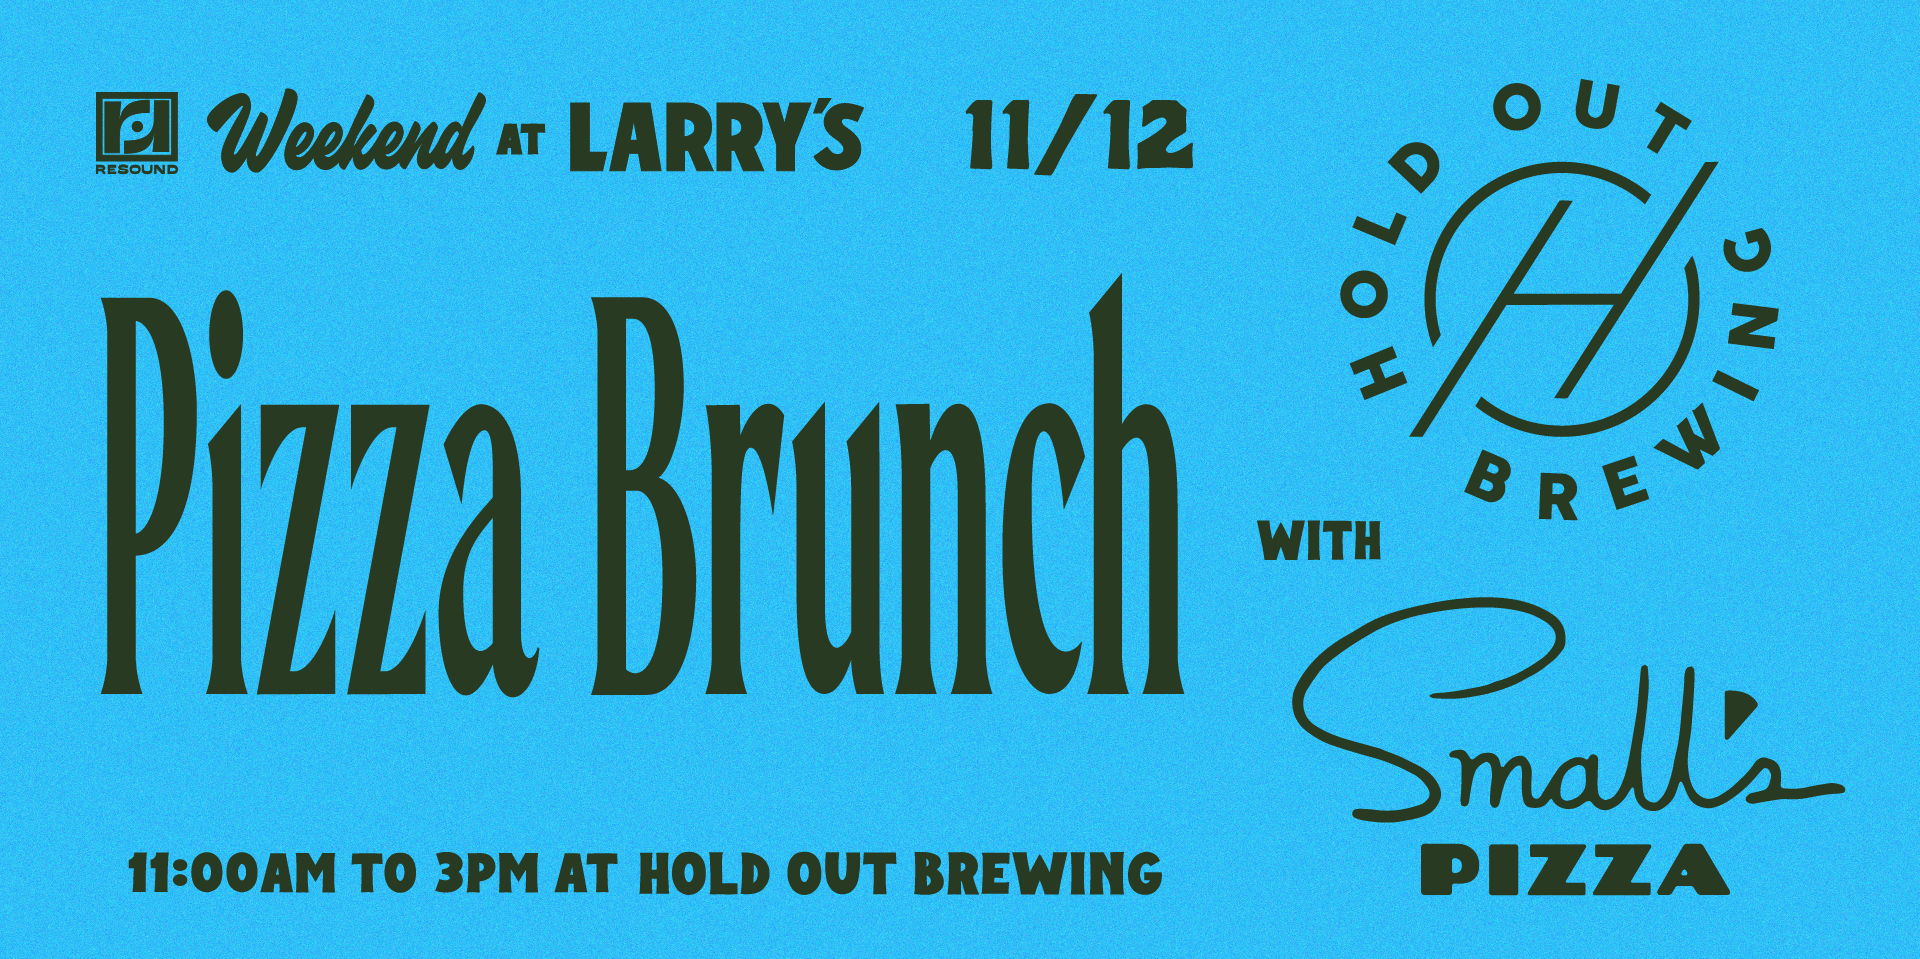  Weekend at Larry's Does Pizza Brunch on 11/12 promotional image